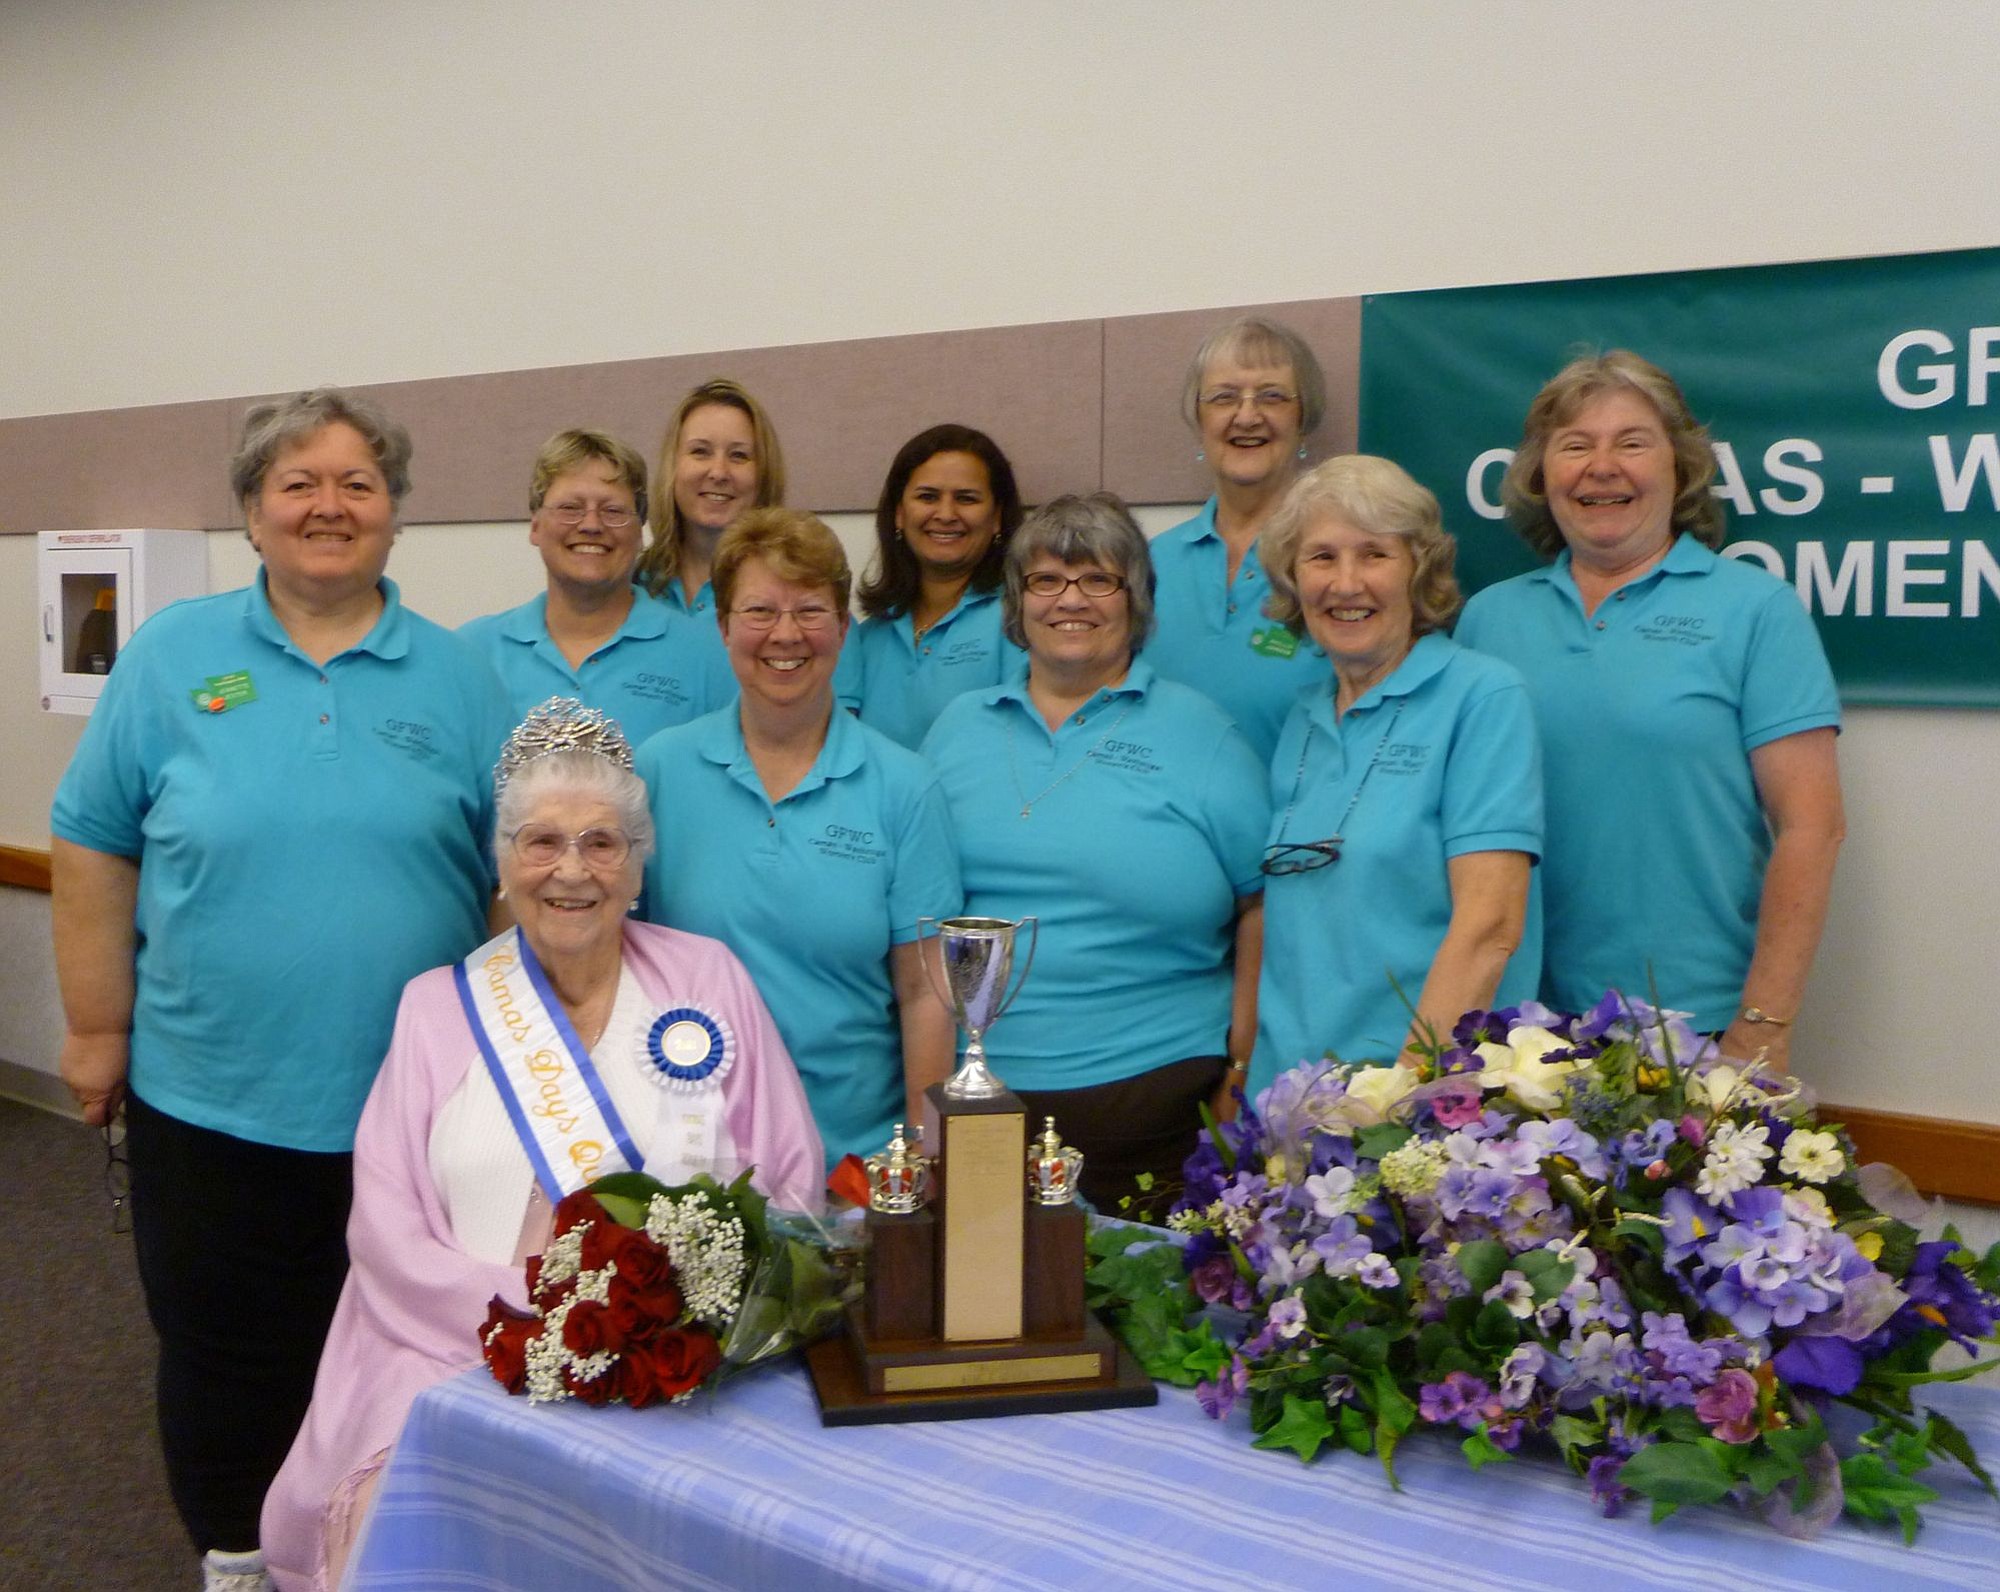 Lila Trammell was crowned 2011 Camas Days queen. Back row from left, Jeanette Jester, Chris Kamps, Caroline Johnson, Monica Gilson and Phyllis Johnson. Front row from left, Tina Bair, Carol Wallace, Alma Ladd and Pat Suggs.